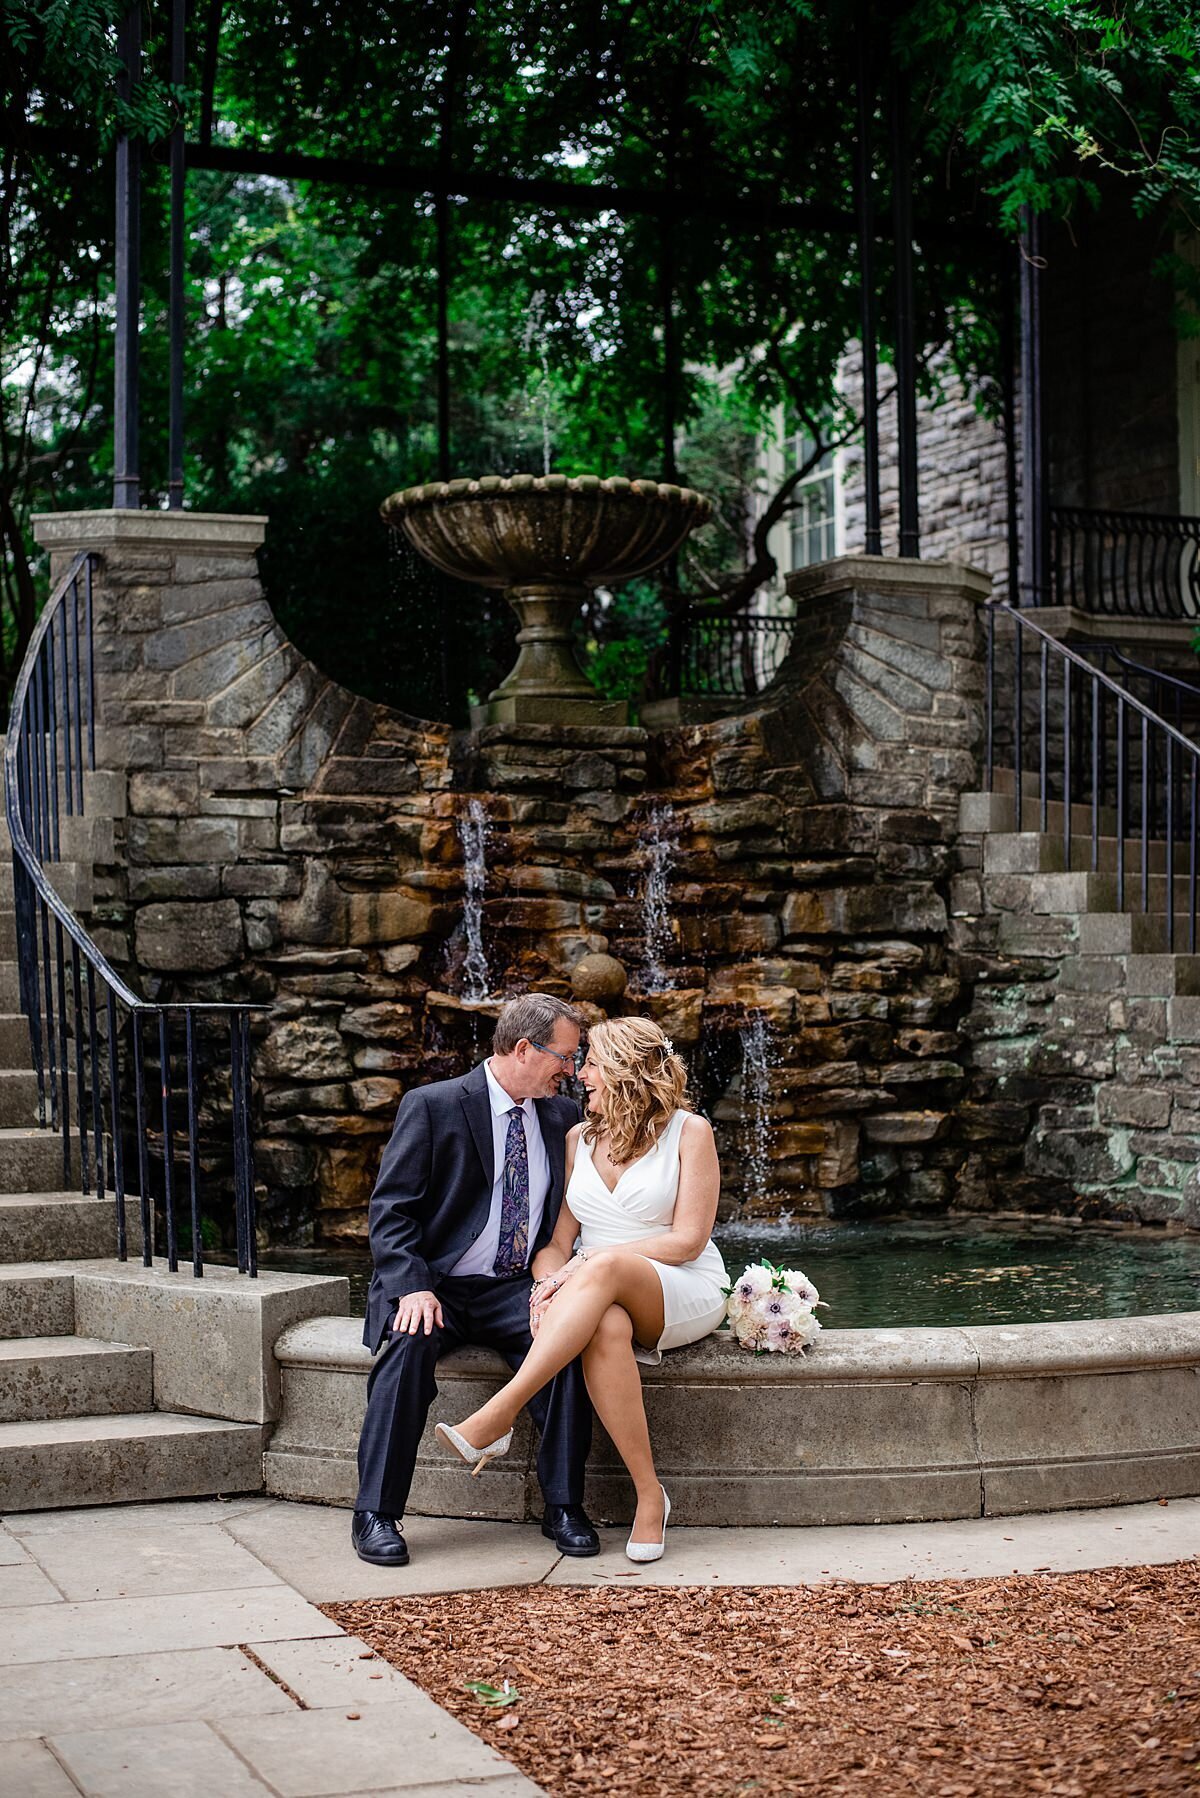 Sitting at the base of a waterfall  fountain with a large stone chalice at the top, the bride and groom touch foreheads as the groom puts his arm around the bride's waist. There are two semi spiraling staircases  on either side of the fountain. The groom is wearing a navy suit with a white shirt and blue patterned tie. The bride is wearing a short, fitted white dress with a plunging neckline. The bridal bouquet sits on the edge of the fountain  next to her. It is made up of white, ivory and blush flowers.